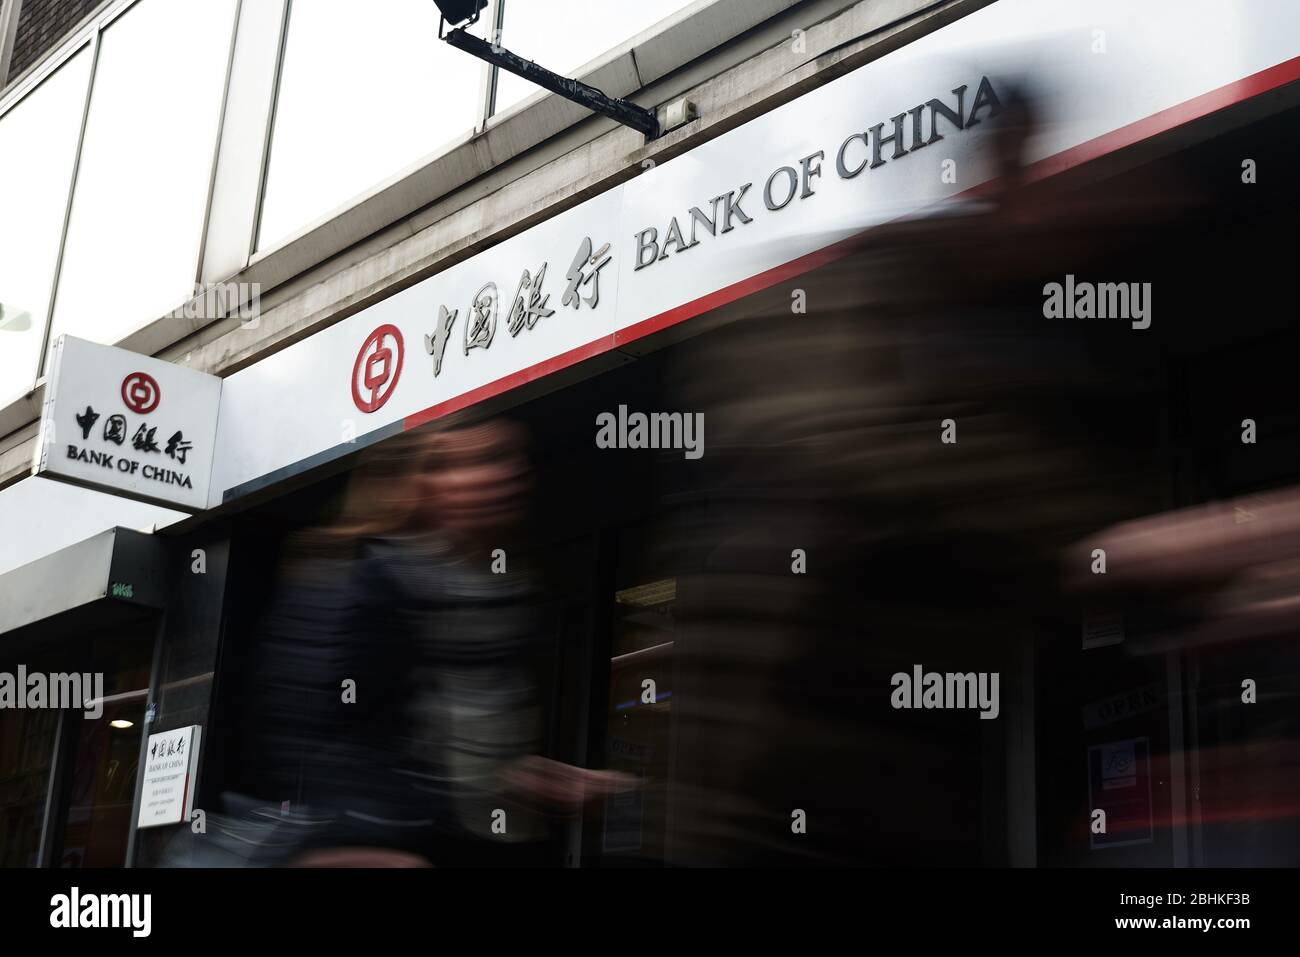 Bank of China exterior based in the city of London Stock Photo